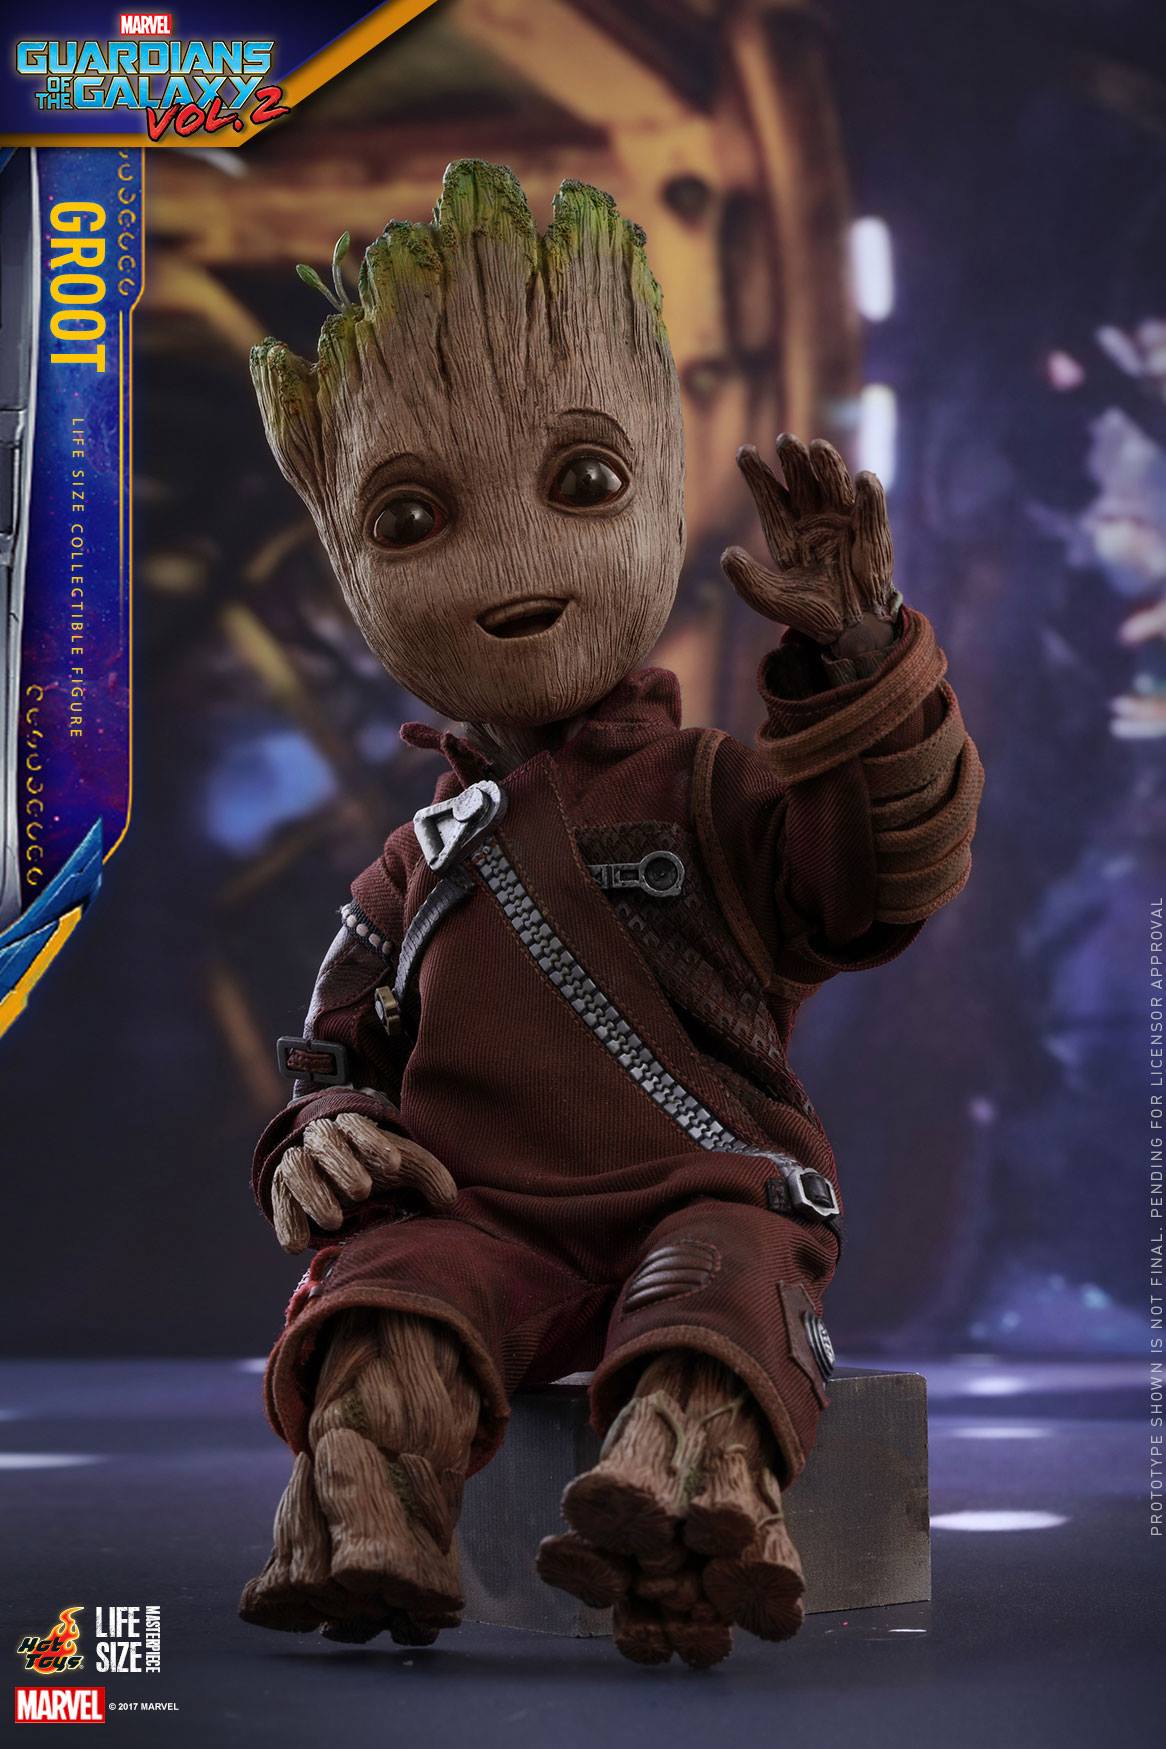 Guardians of the Galaxy Vol. 2 Groot Life Size Figure